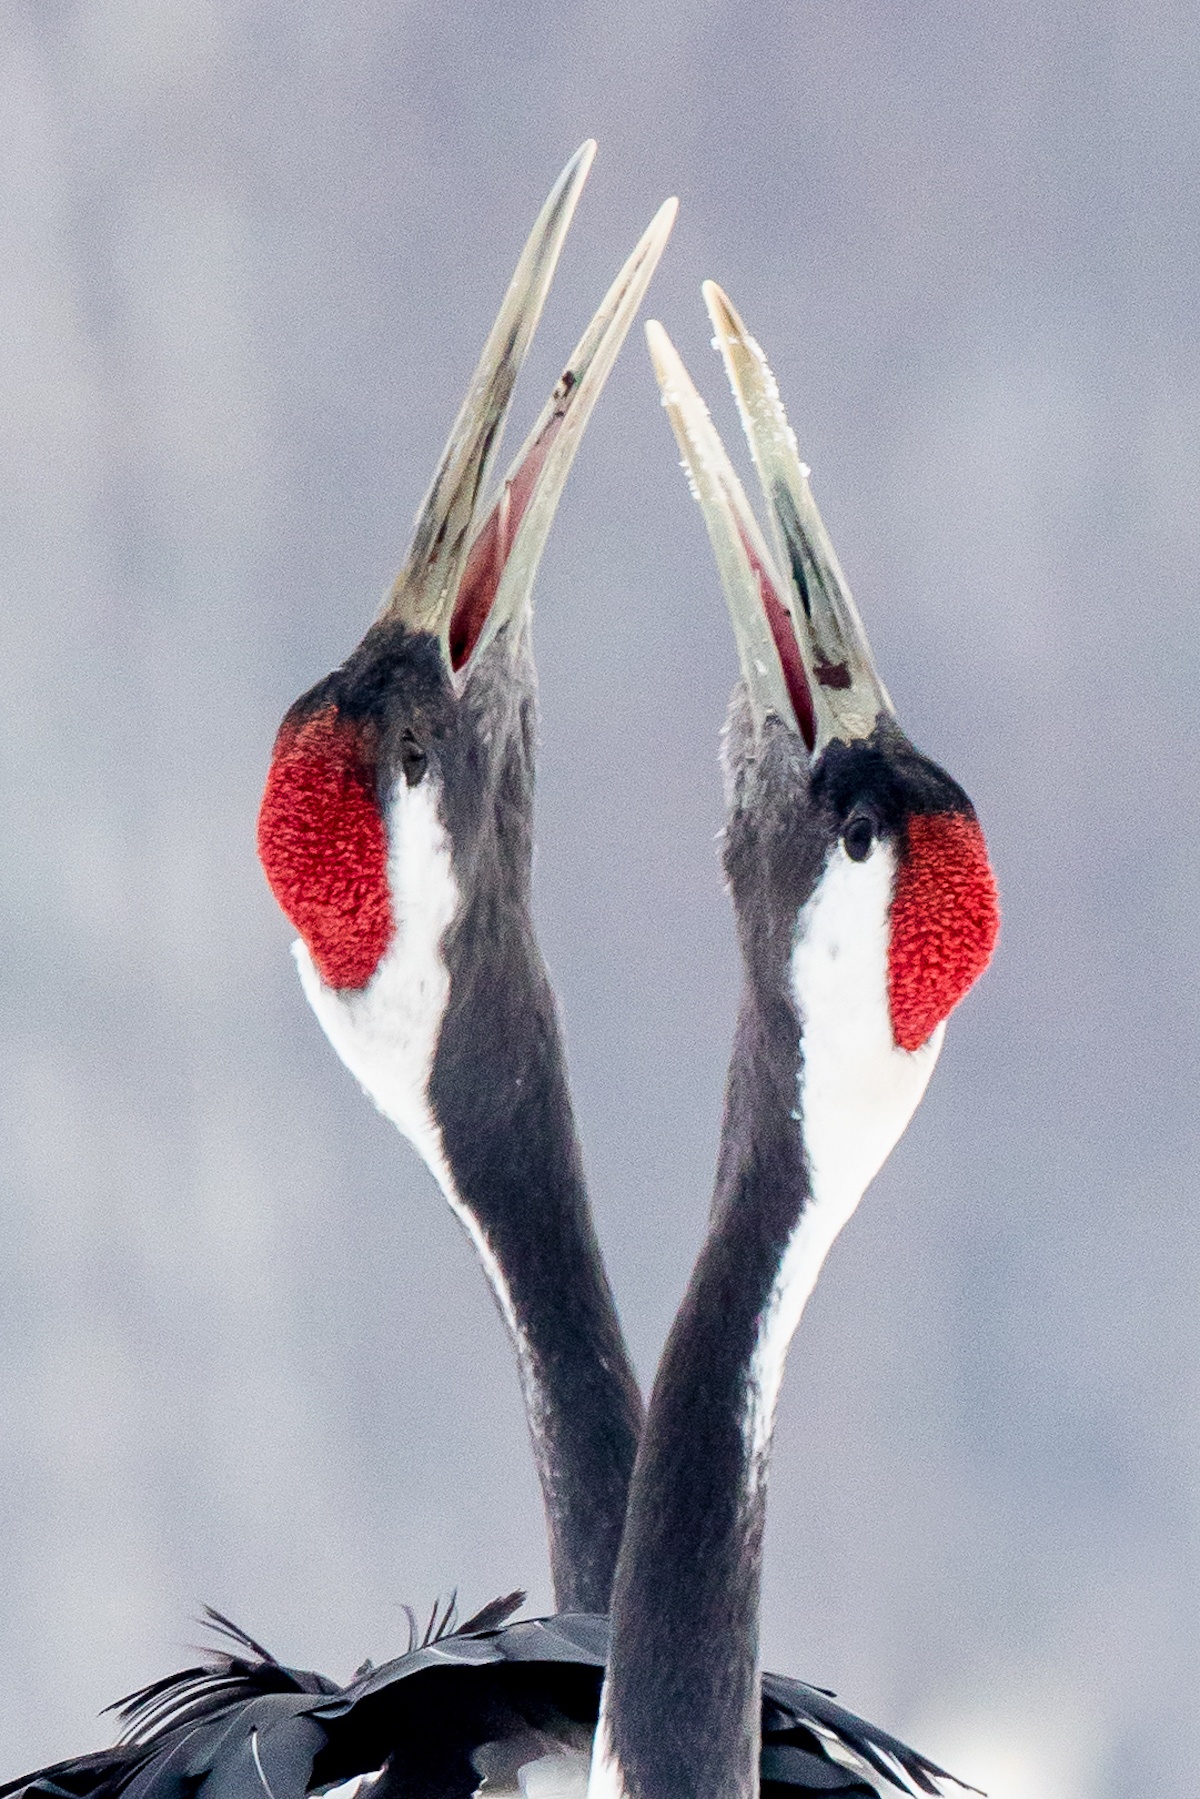 Displaying Red-crowned (or Japanese) Cranes in winter in Hokkaido. Cranes mate for life